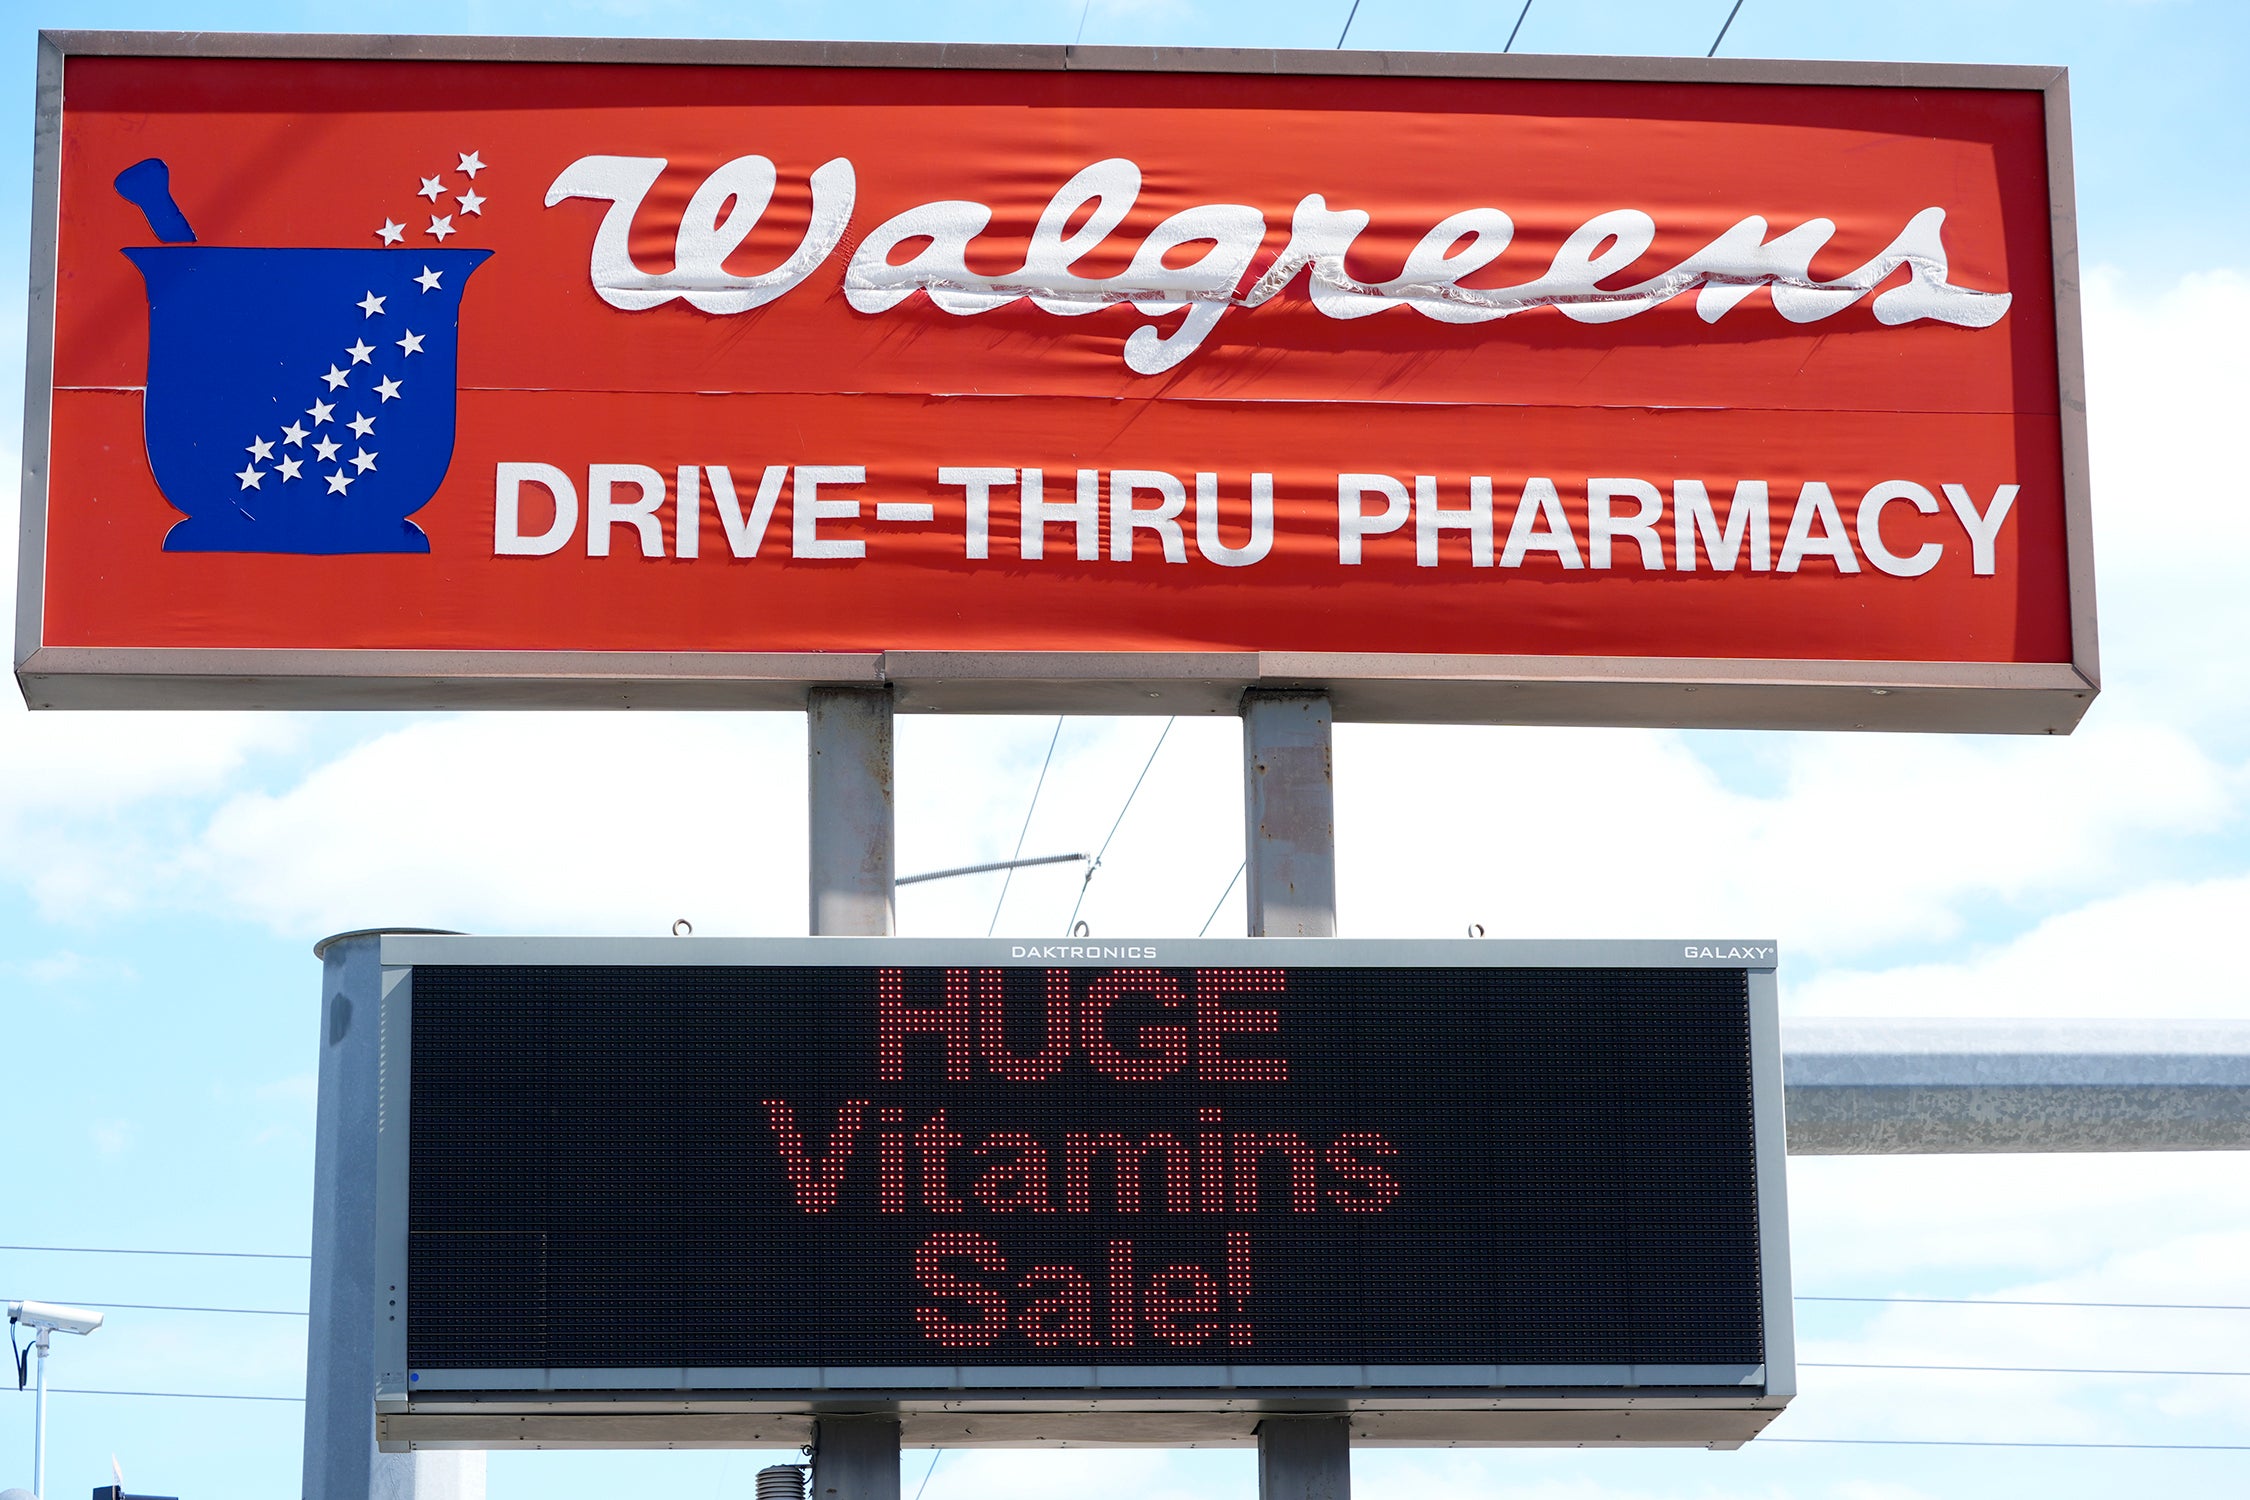 Walgreens has become the latest retailer to slash its prices